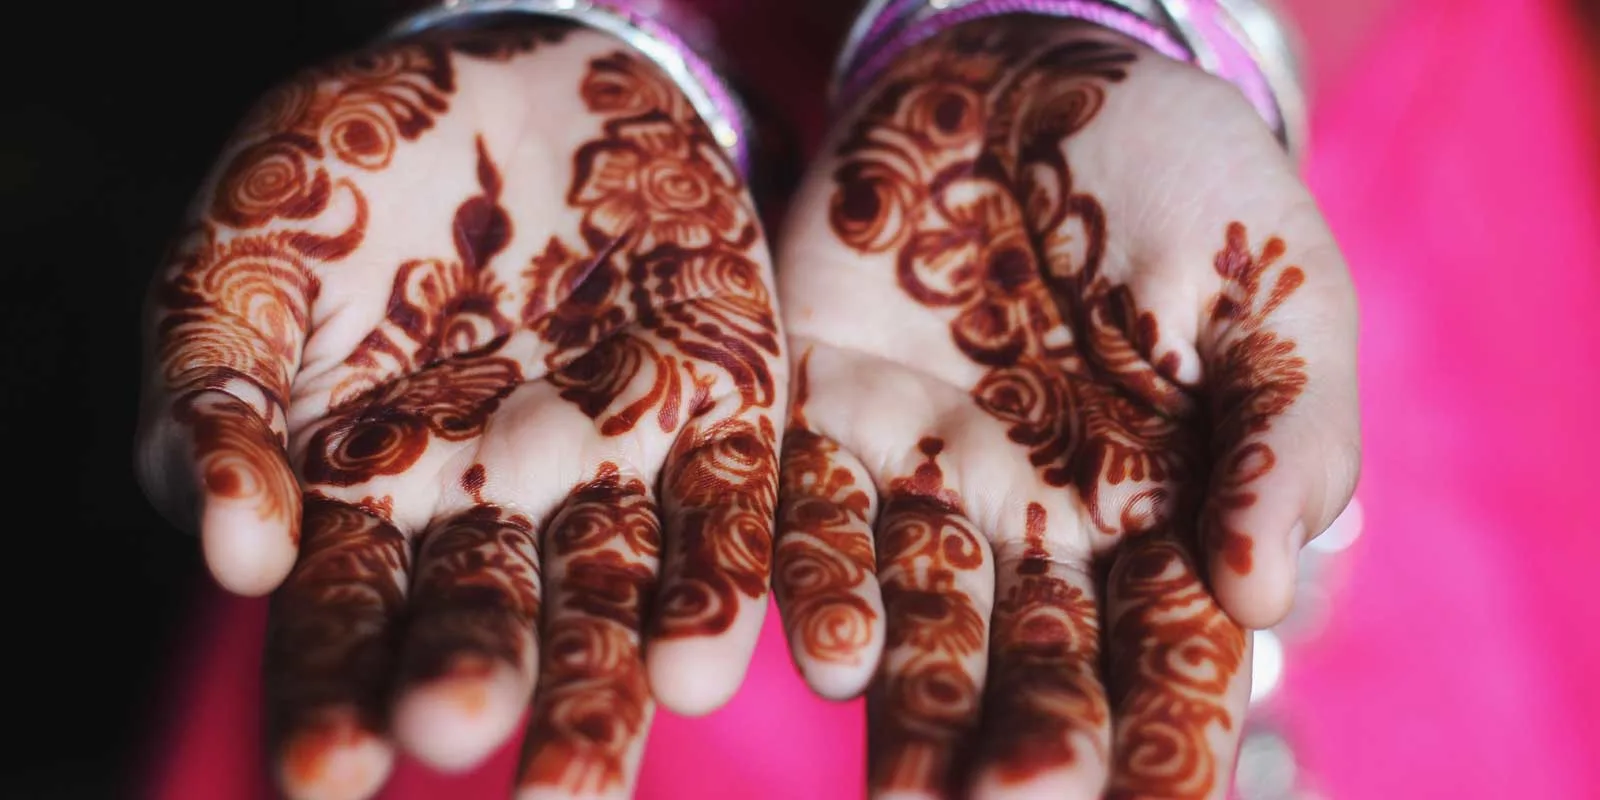 Closeup photo of a woman's hands with intricate henna tattoo on her palms.